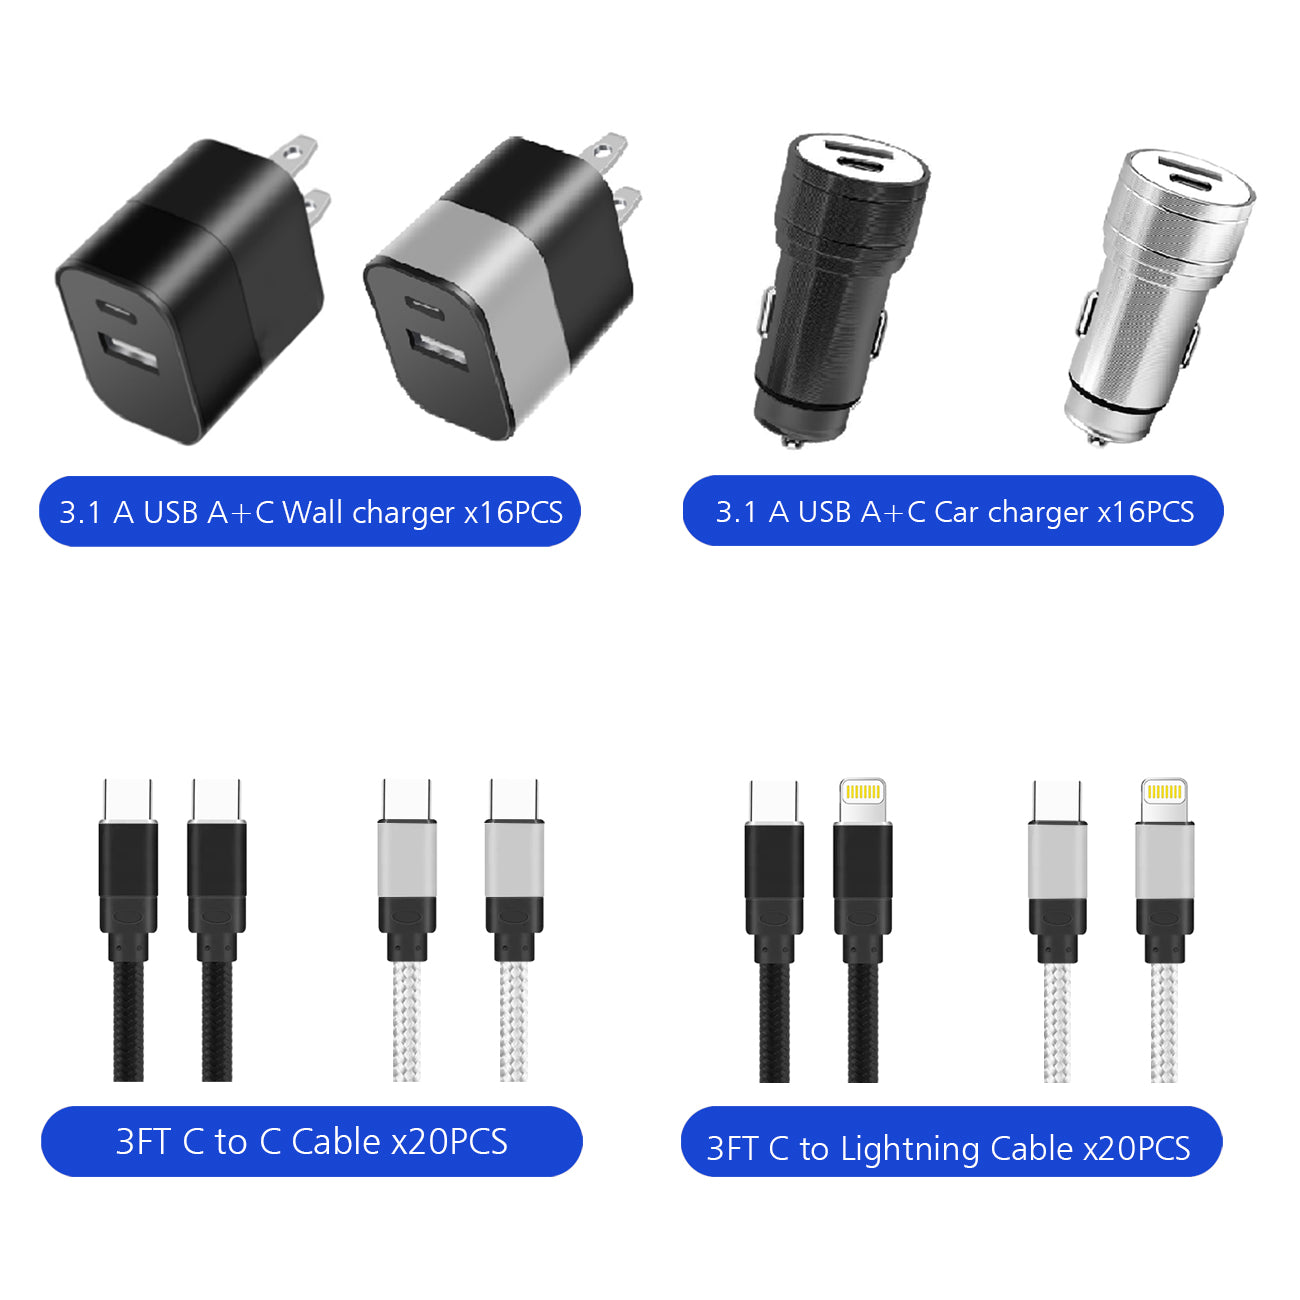 WALL Charger USB A + C 2.4A / Car Charger USB A + C / Cable 3ft C to C /  Lightning Cable in Counter Display 3ft c Total 72pcs